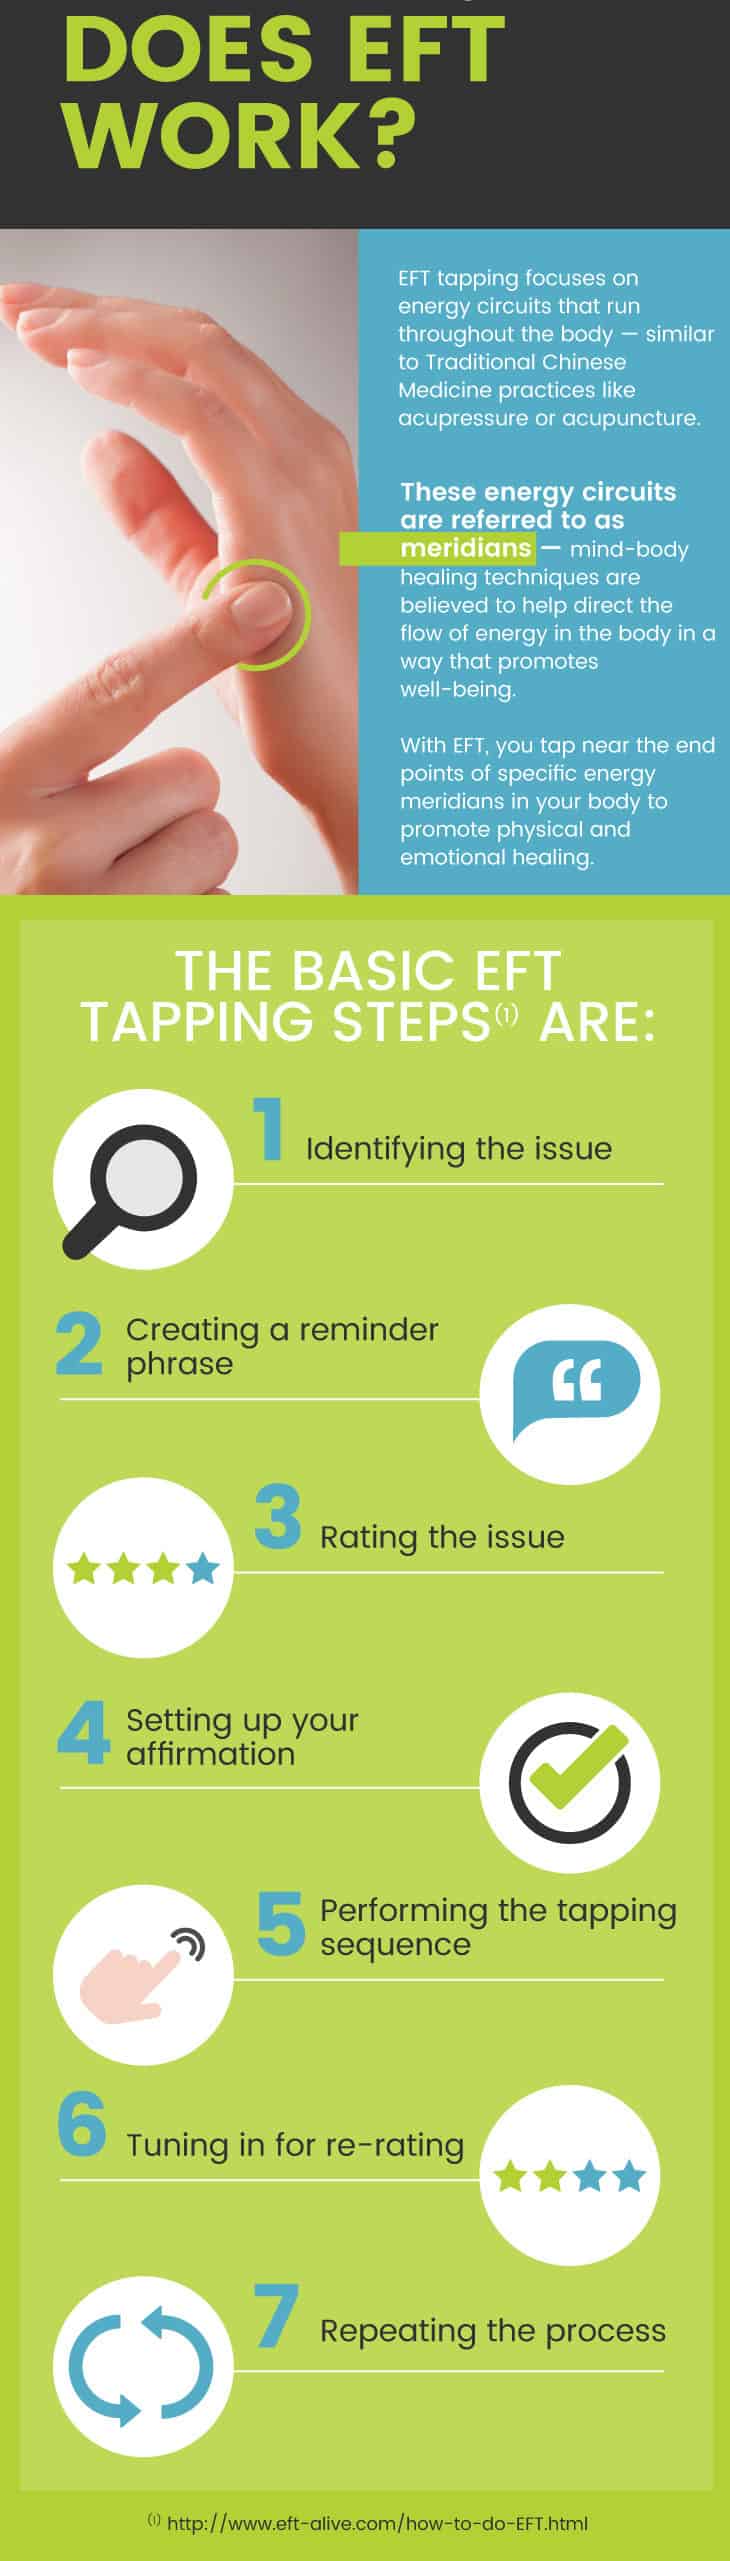 EFT tapping steps - Dr. Axe